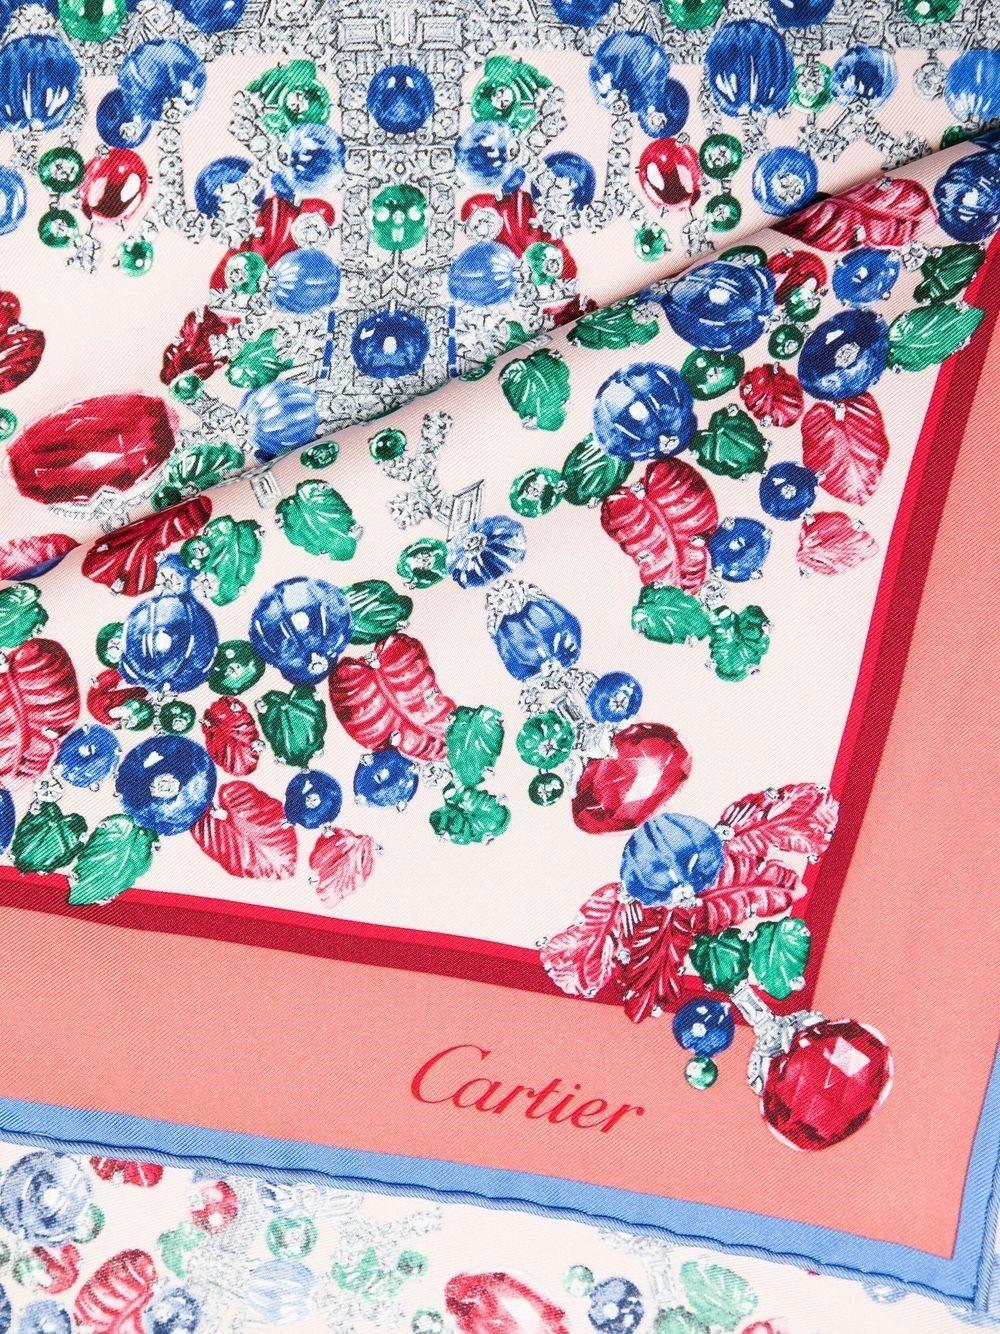 Having designed timeless keepsakes since the 1840s, Cartier continues to speak the language of unadulterated luxury with accessories that celebrate the Maison’s rich and storied history. Take this scarf, for example: exquisitely crafted from